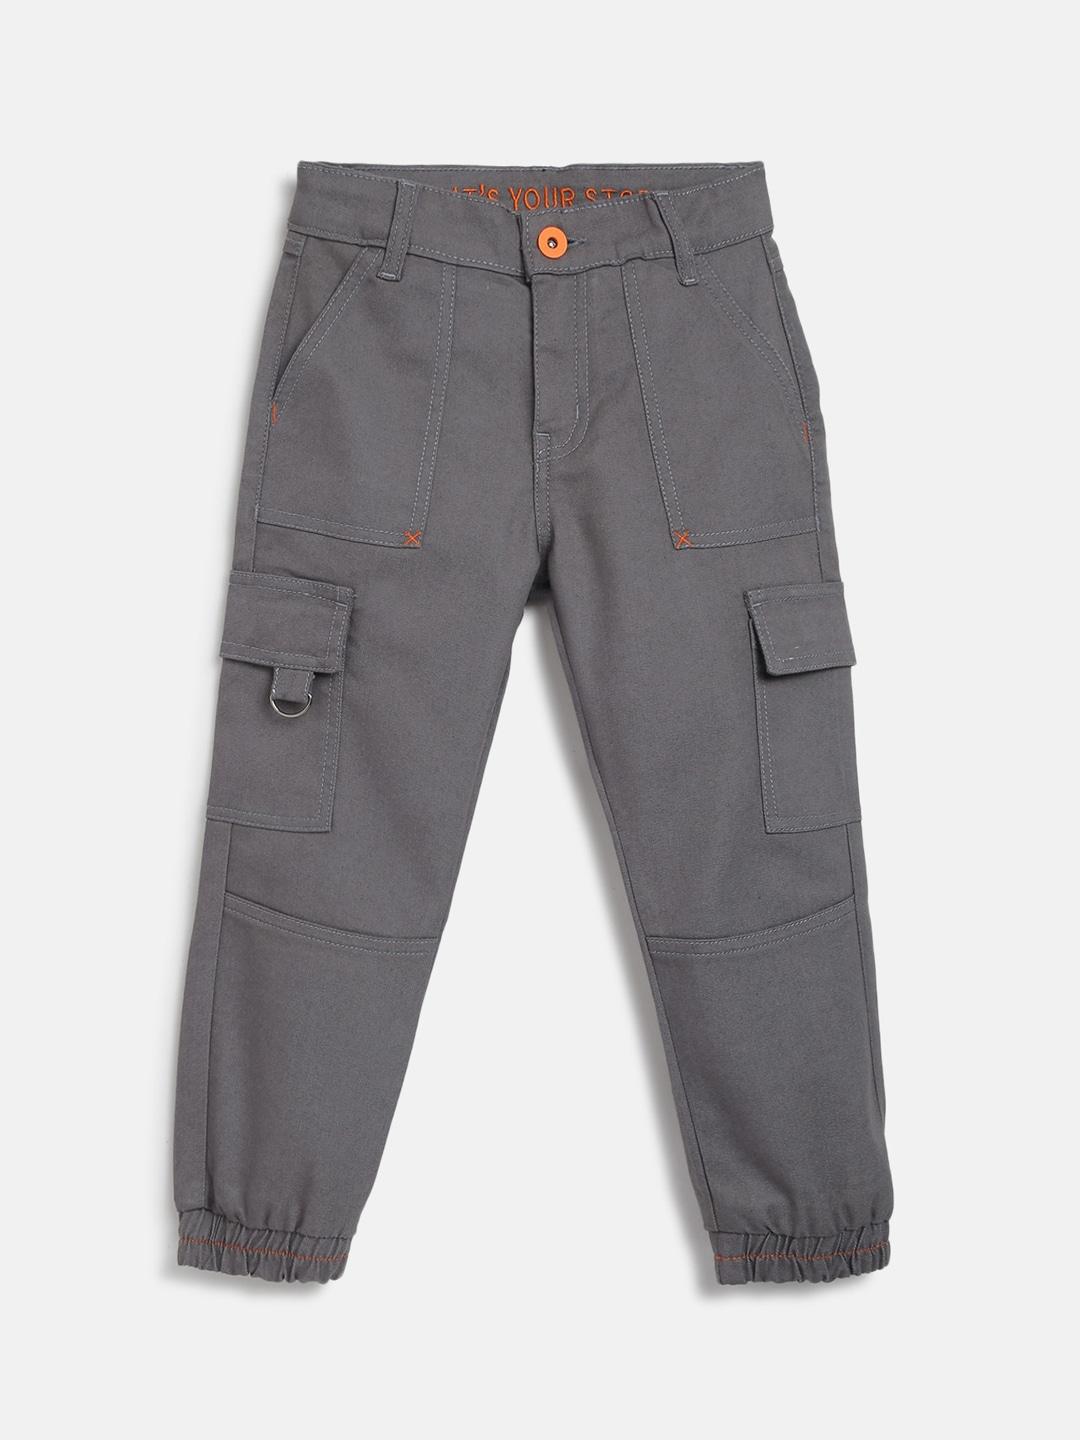 tales-&-stories-boys-grey-cargos-trousers